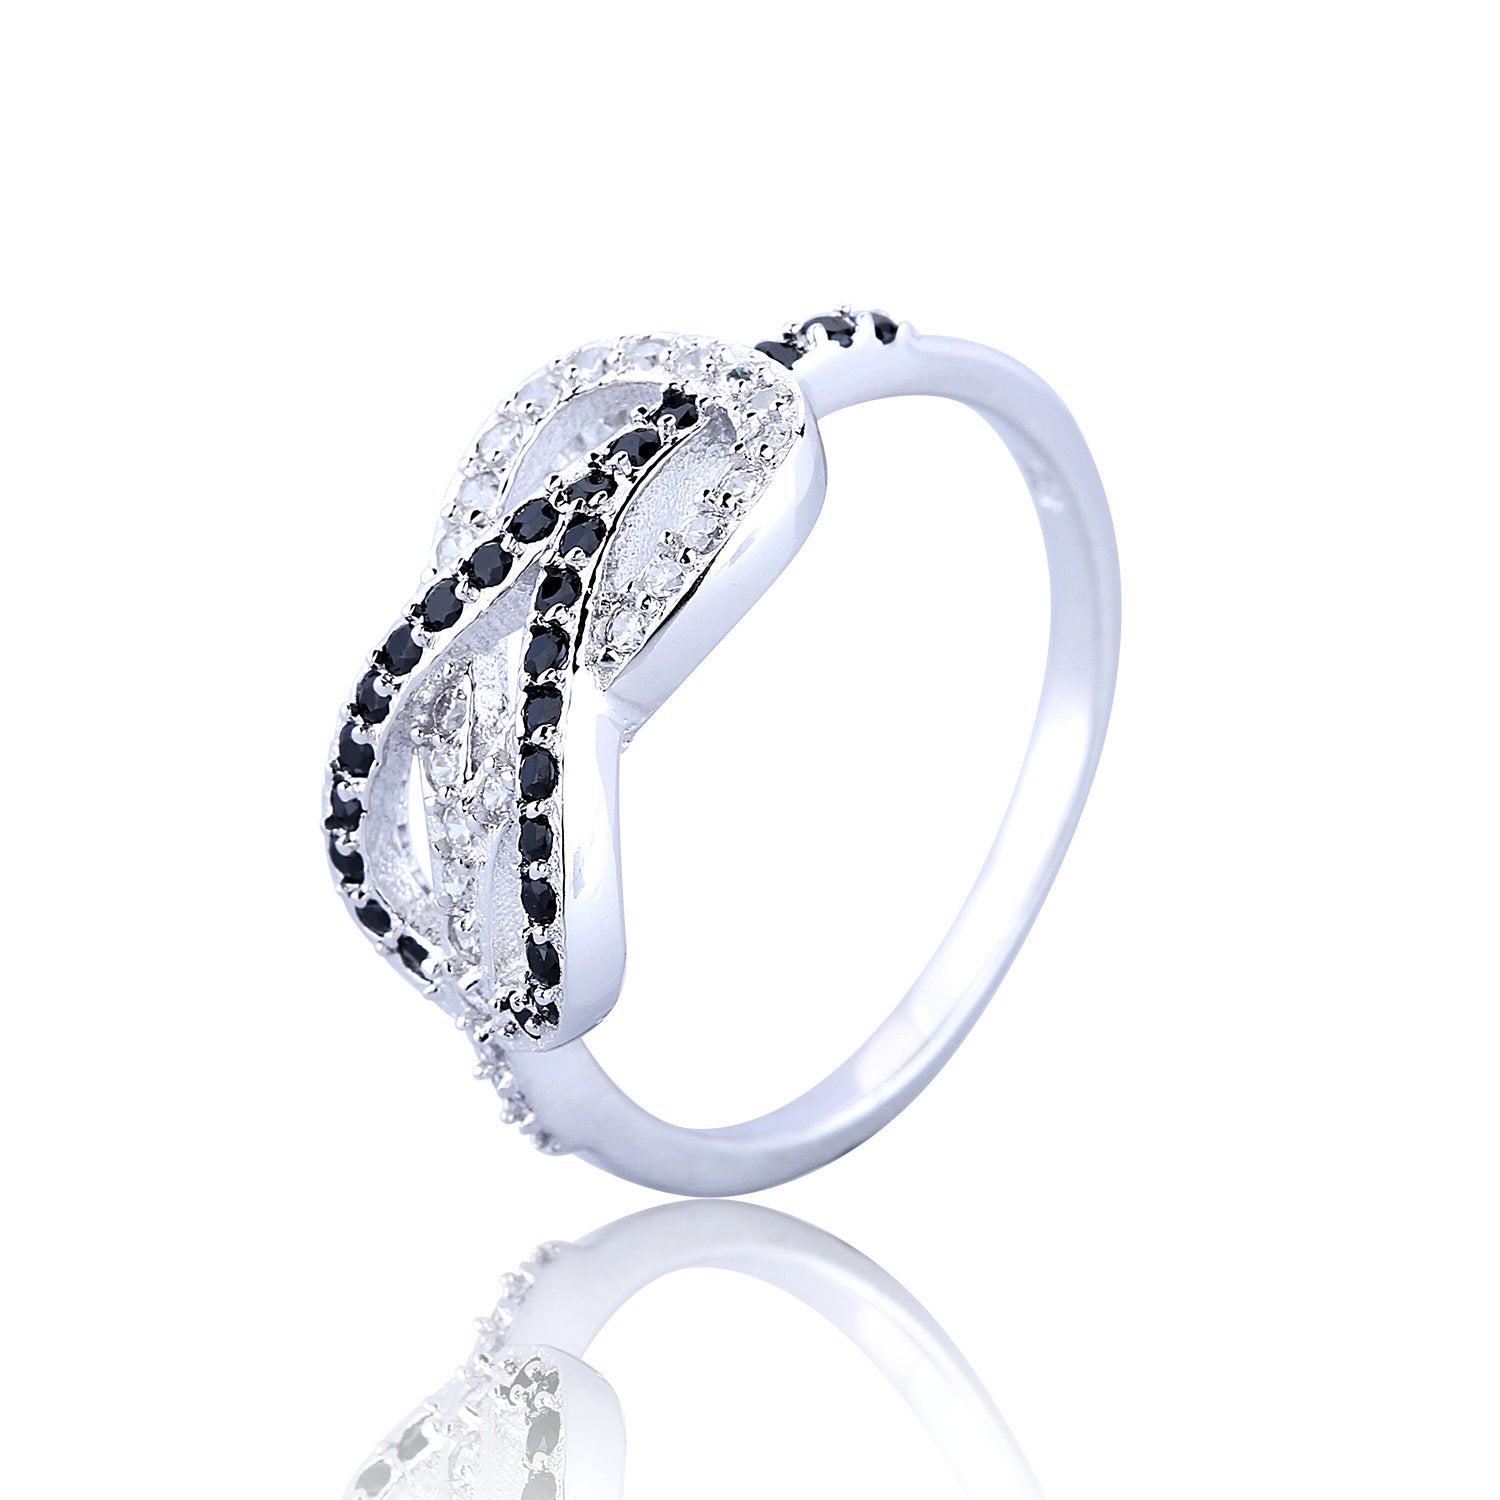 HEART WITH HEART PAVE CZ STERLING SILVER RING